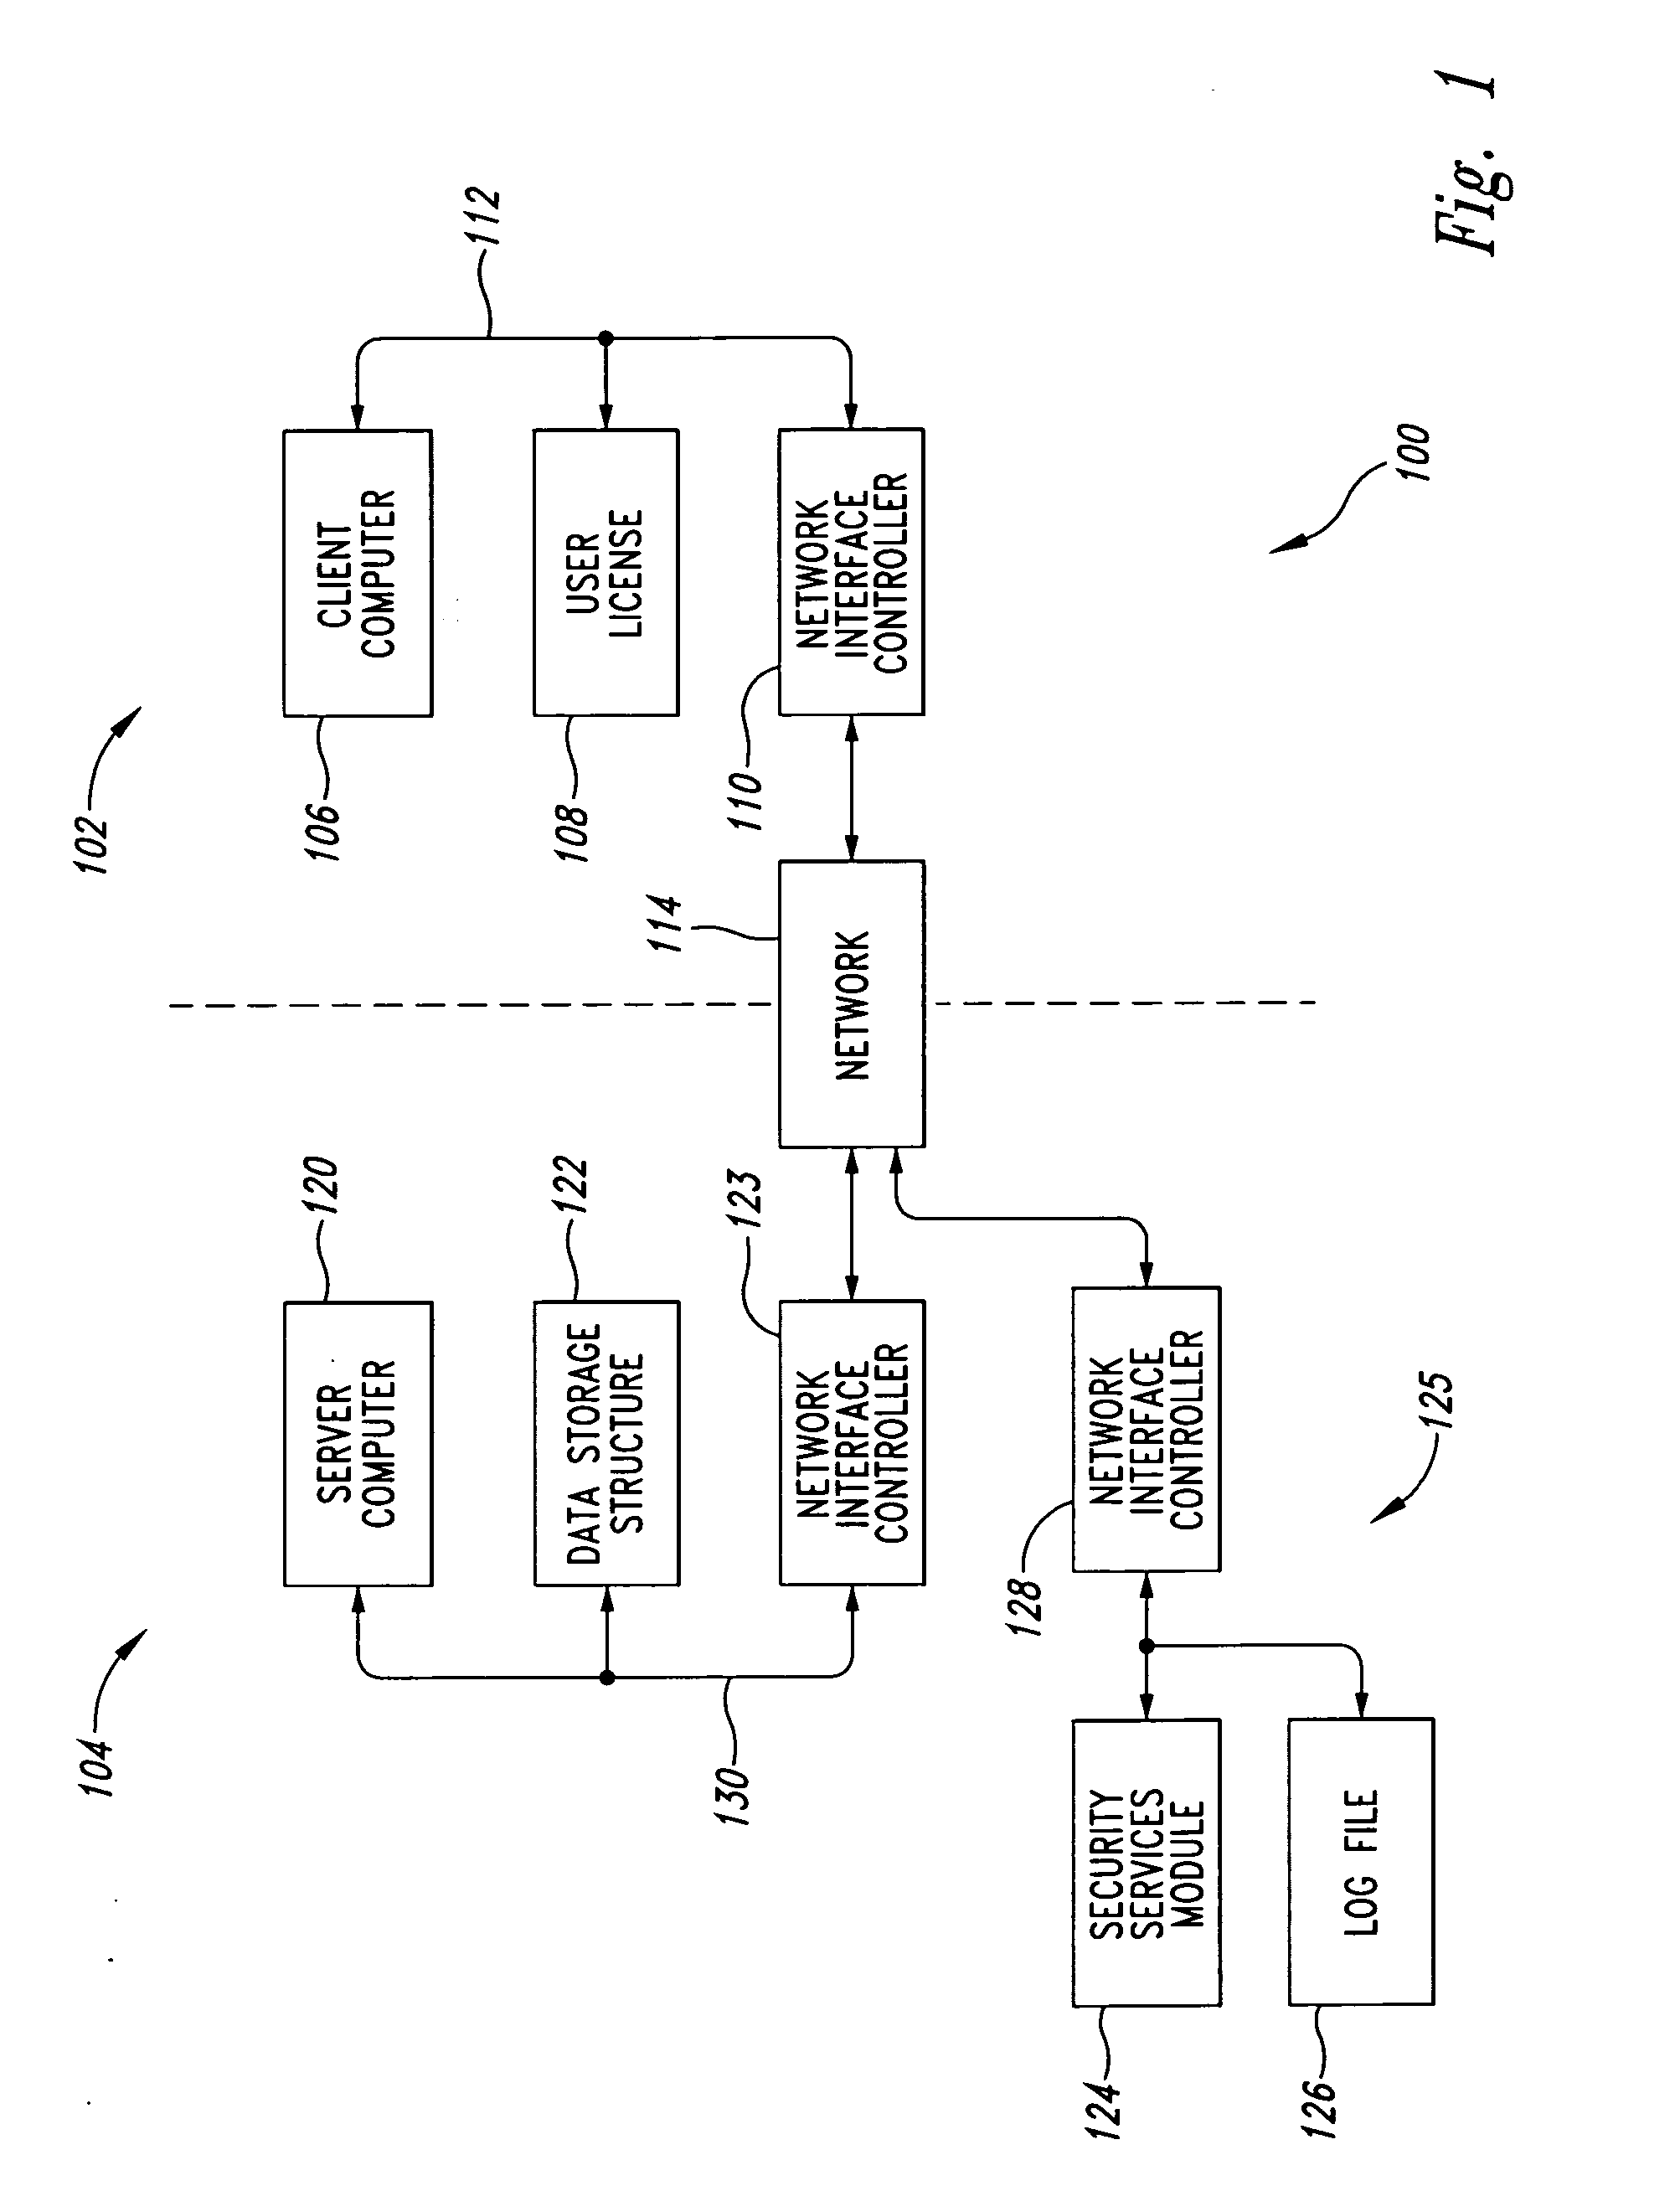 System and method for controlling access and use of patient medical data records